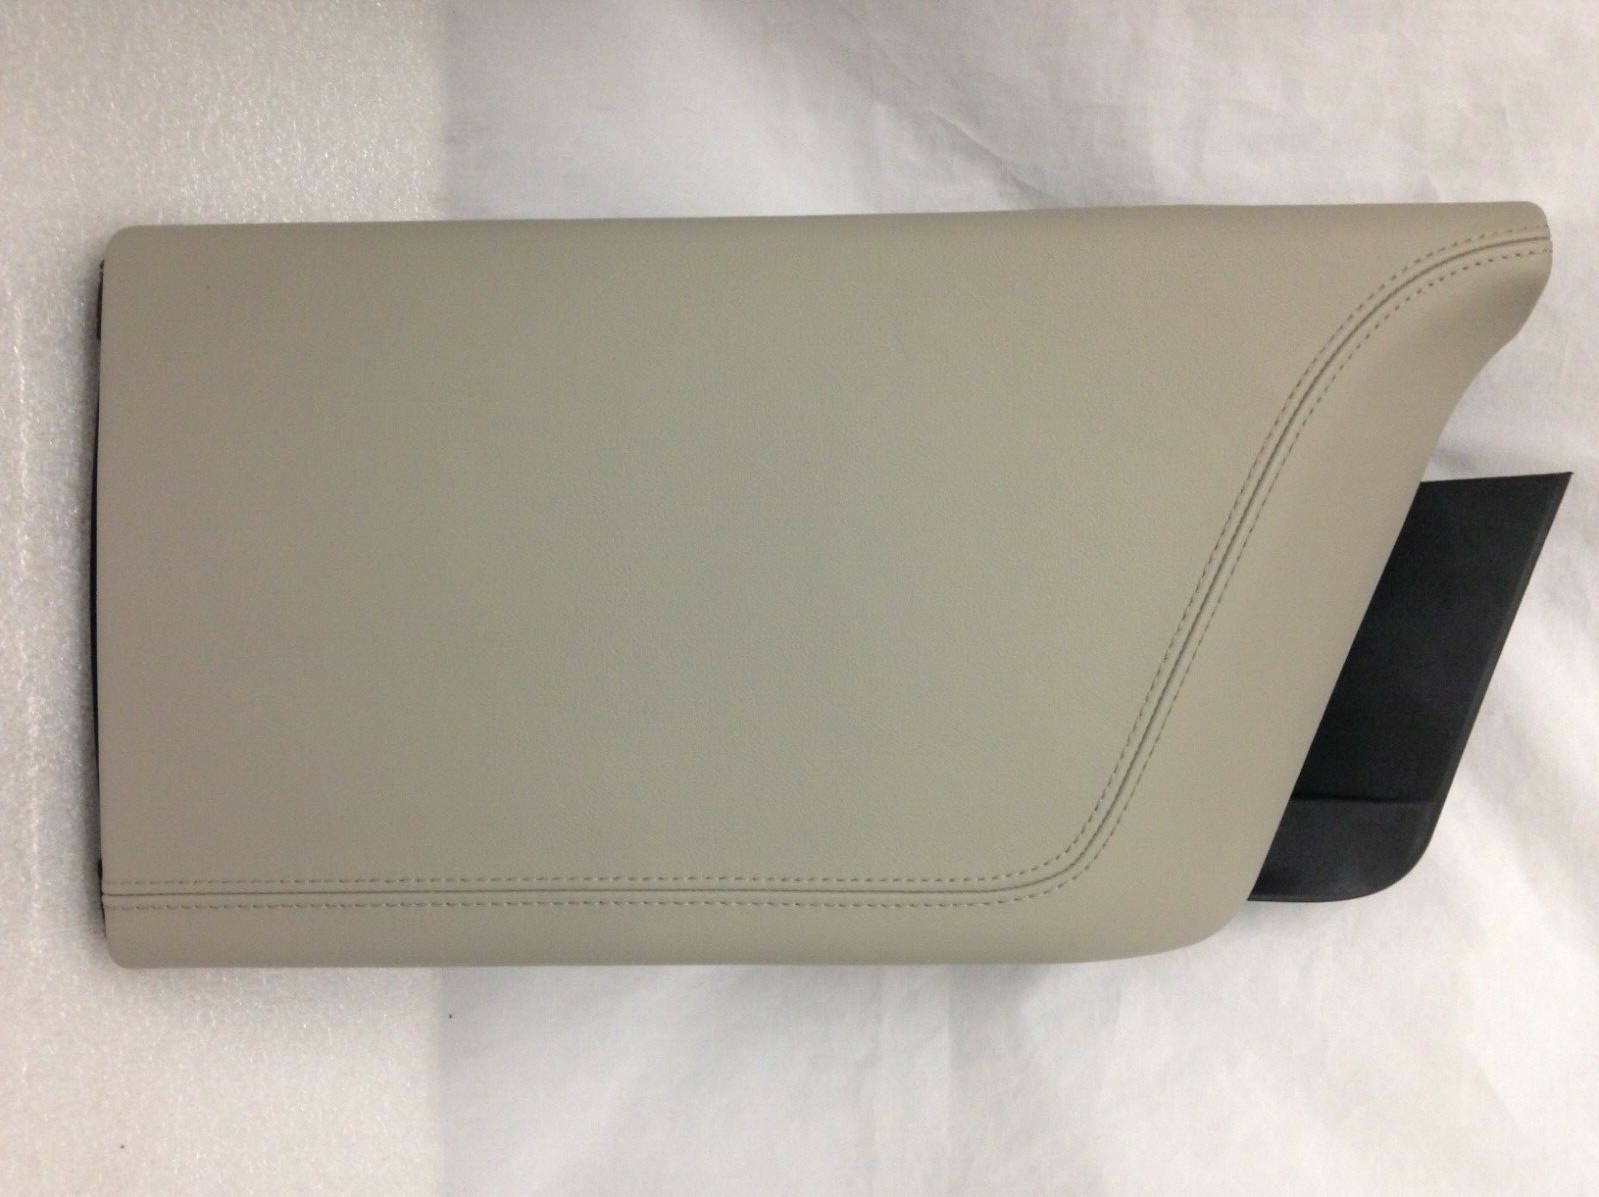 Cadillac CT6 2016+ center console leather lid +bin in Gray NEW